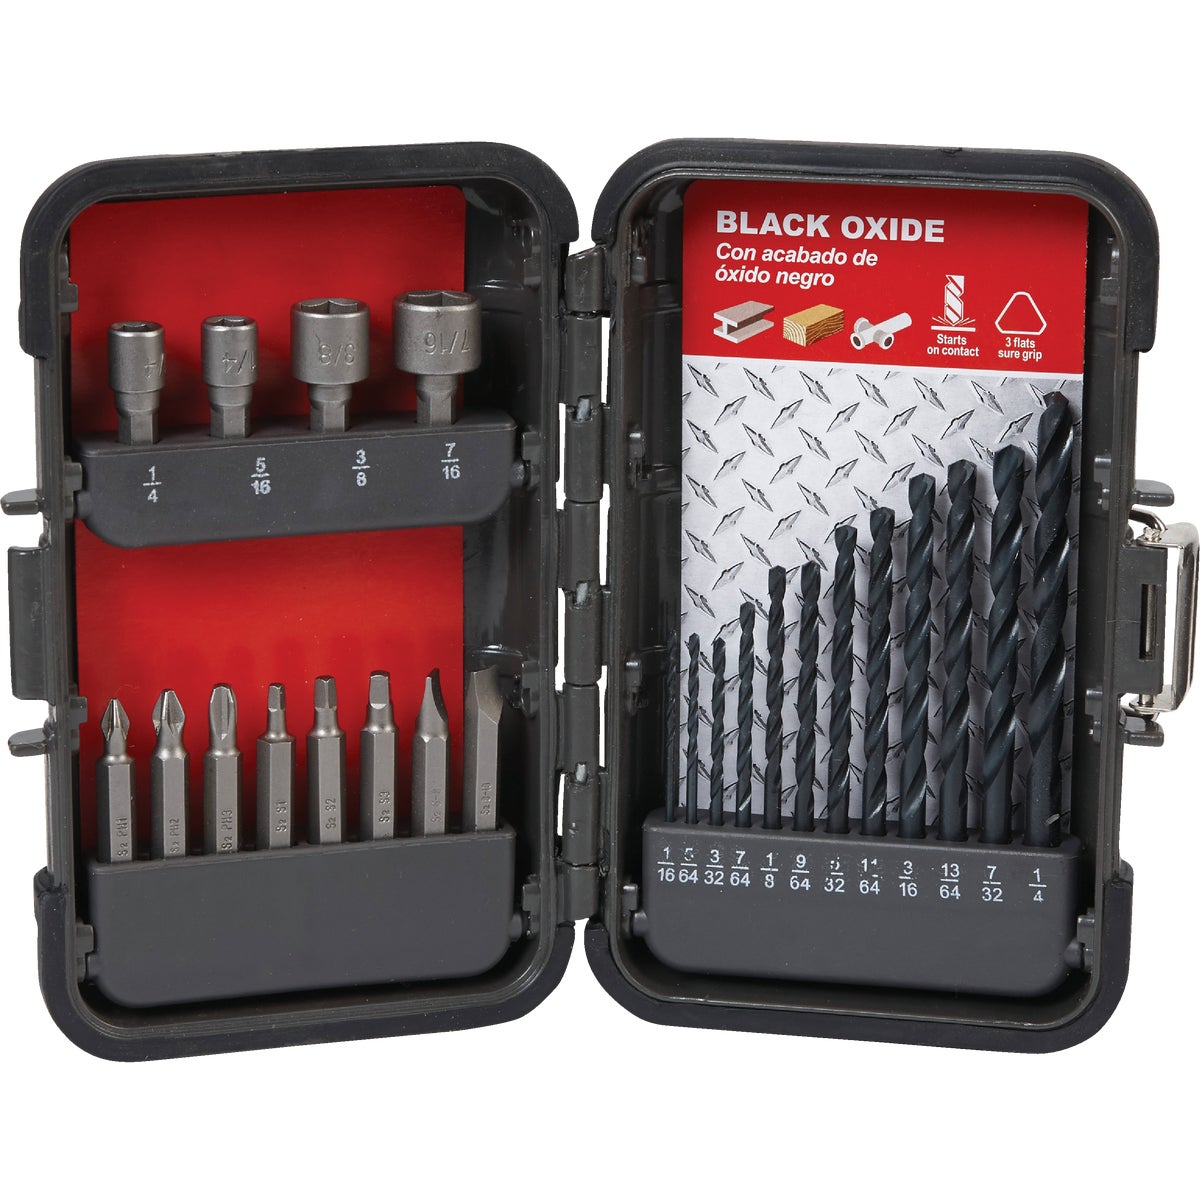 Item 310826, Set includes: Black Oxide High Speed Drill Bits - 1/16, 5/64, 3/32, 7/64, 1